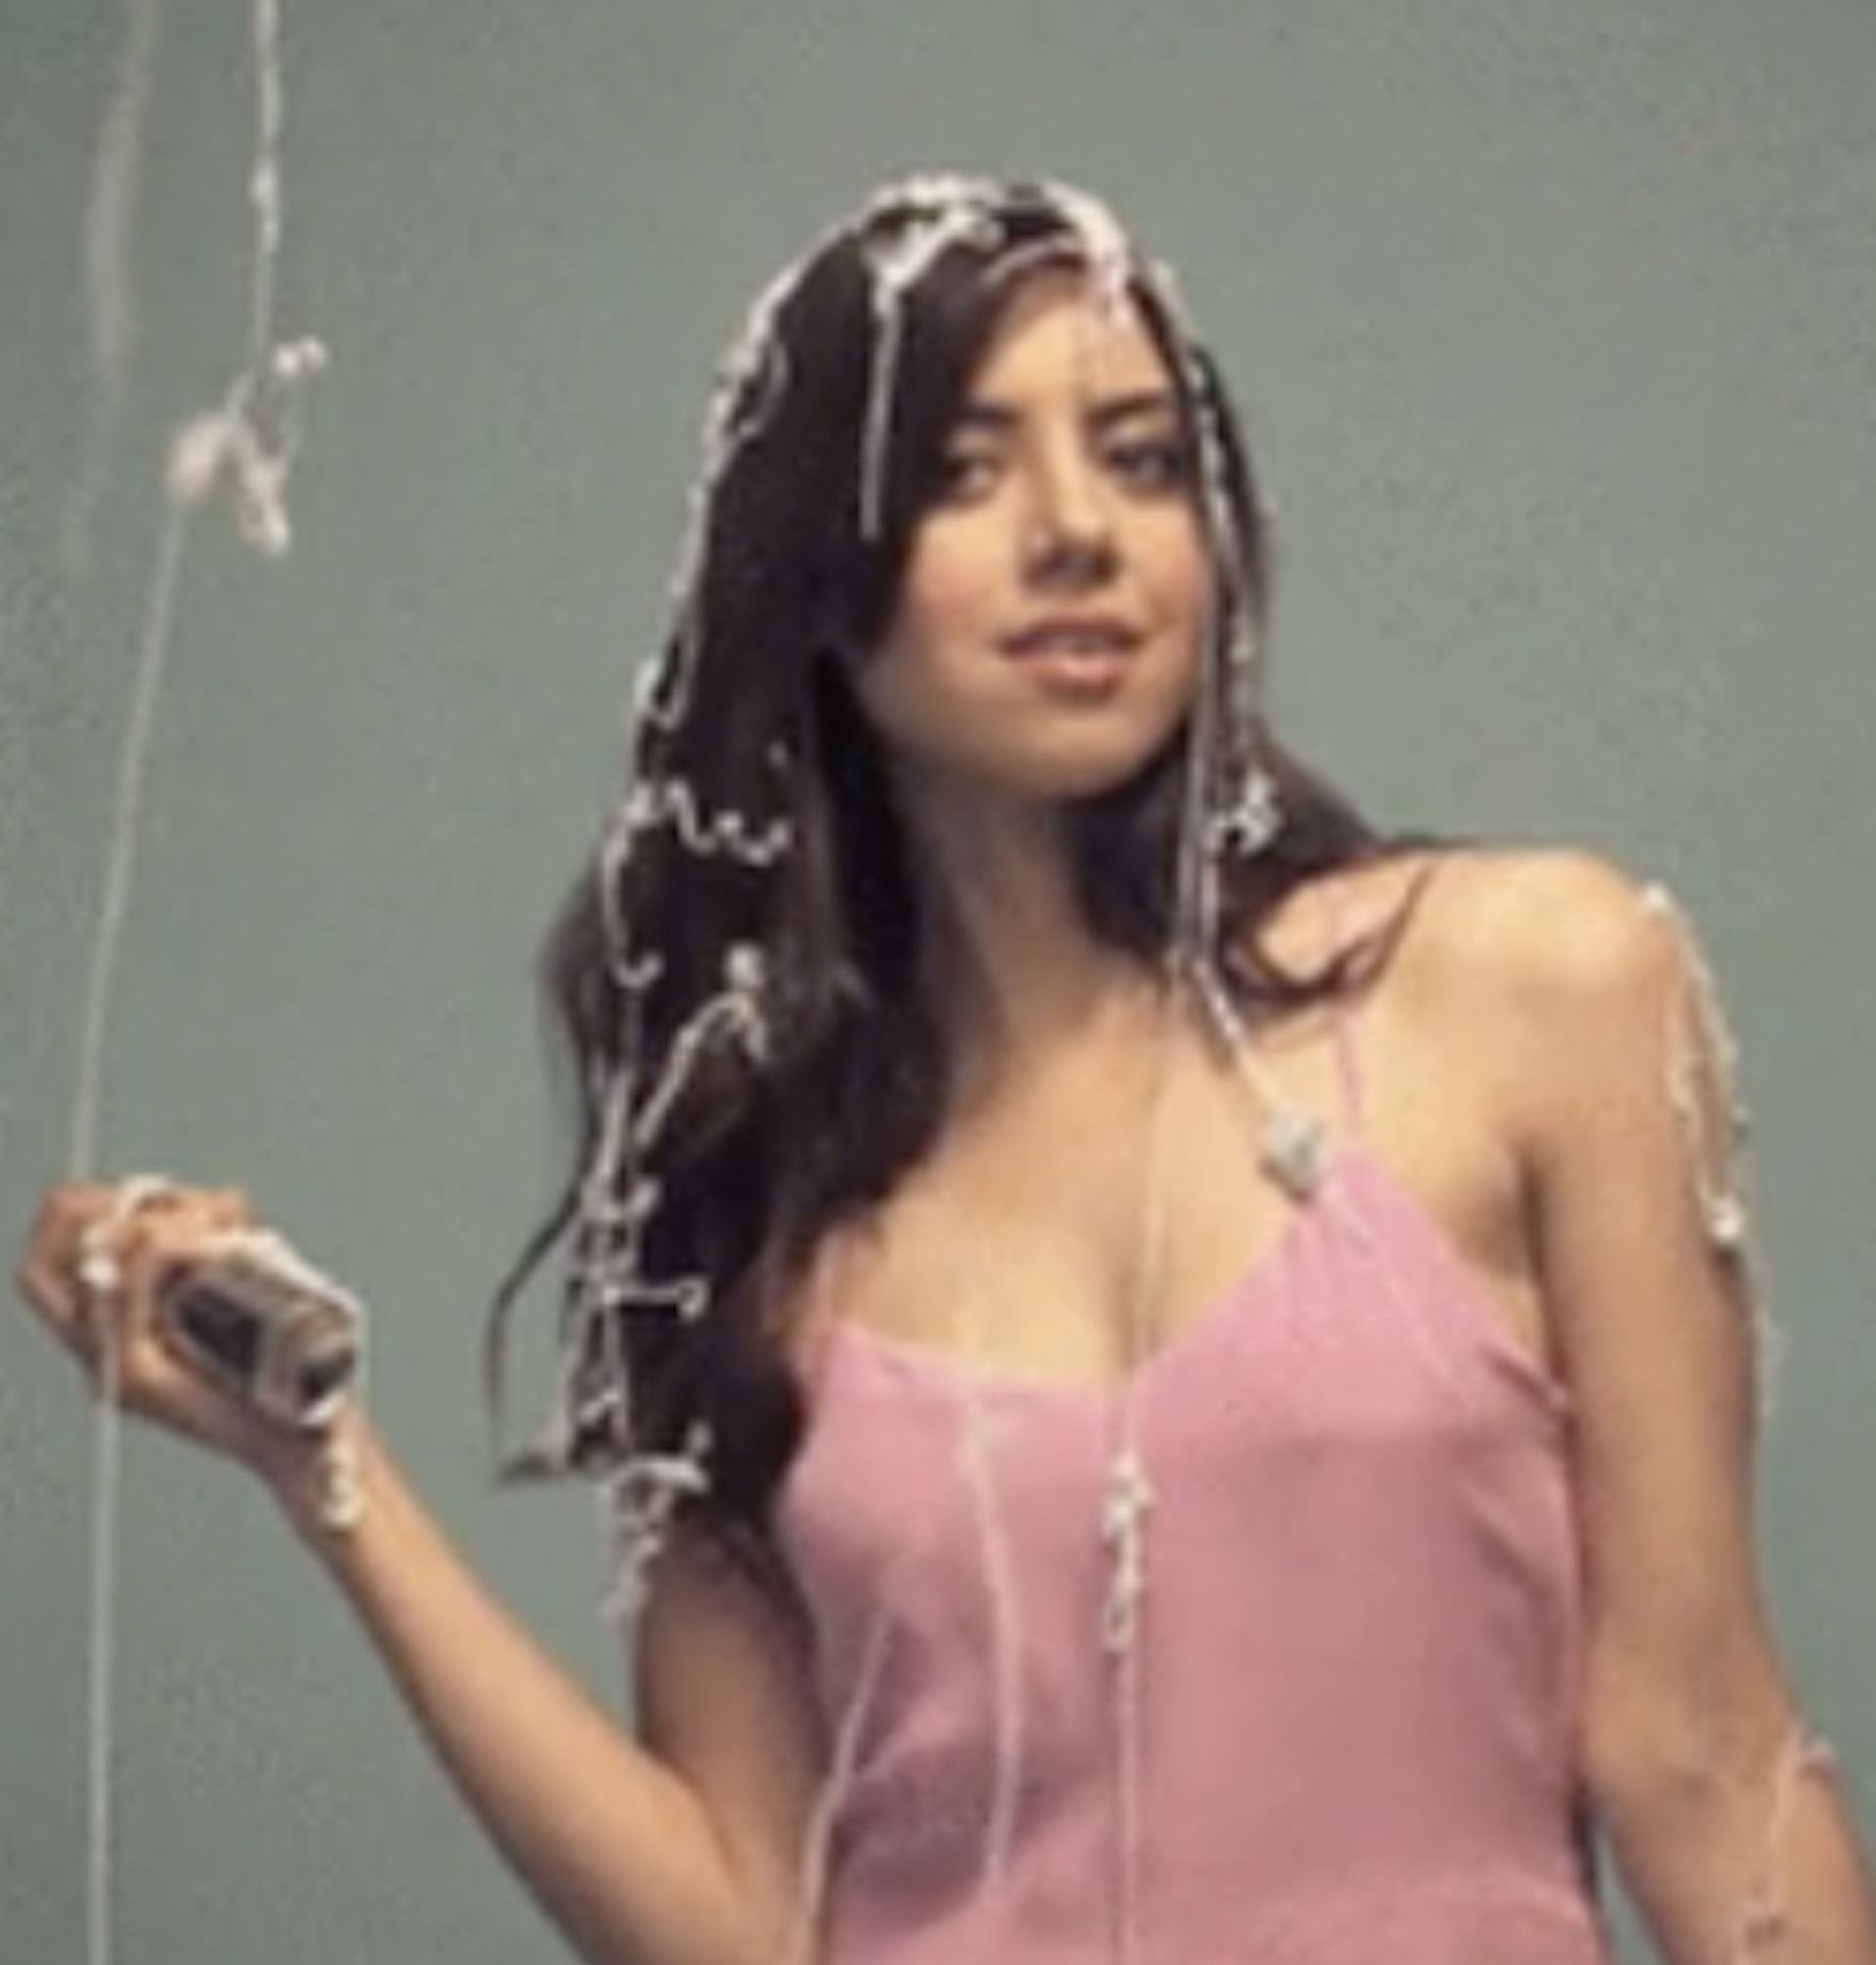 Aubrey Plaza spraying white silly string in the air, landing on her body